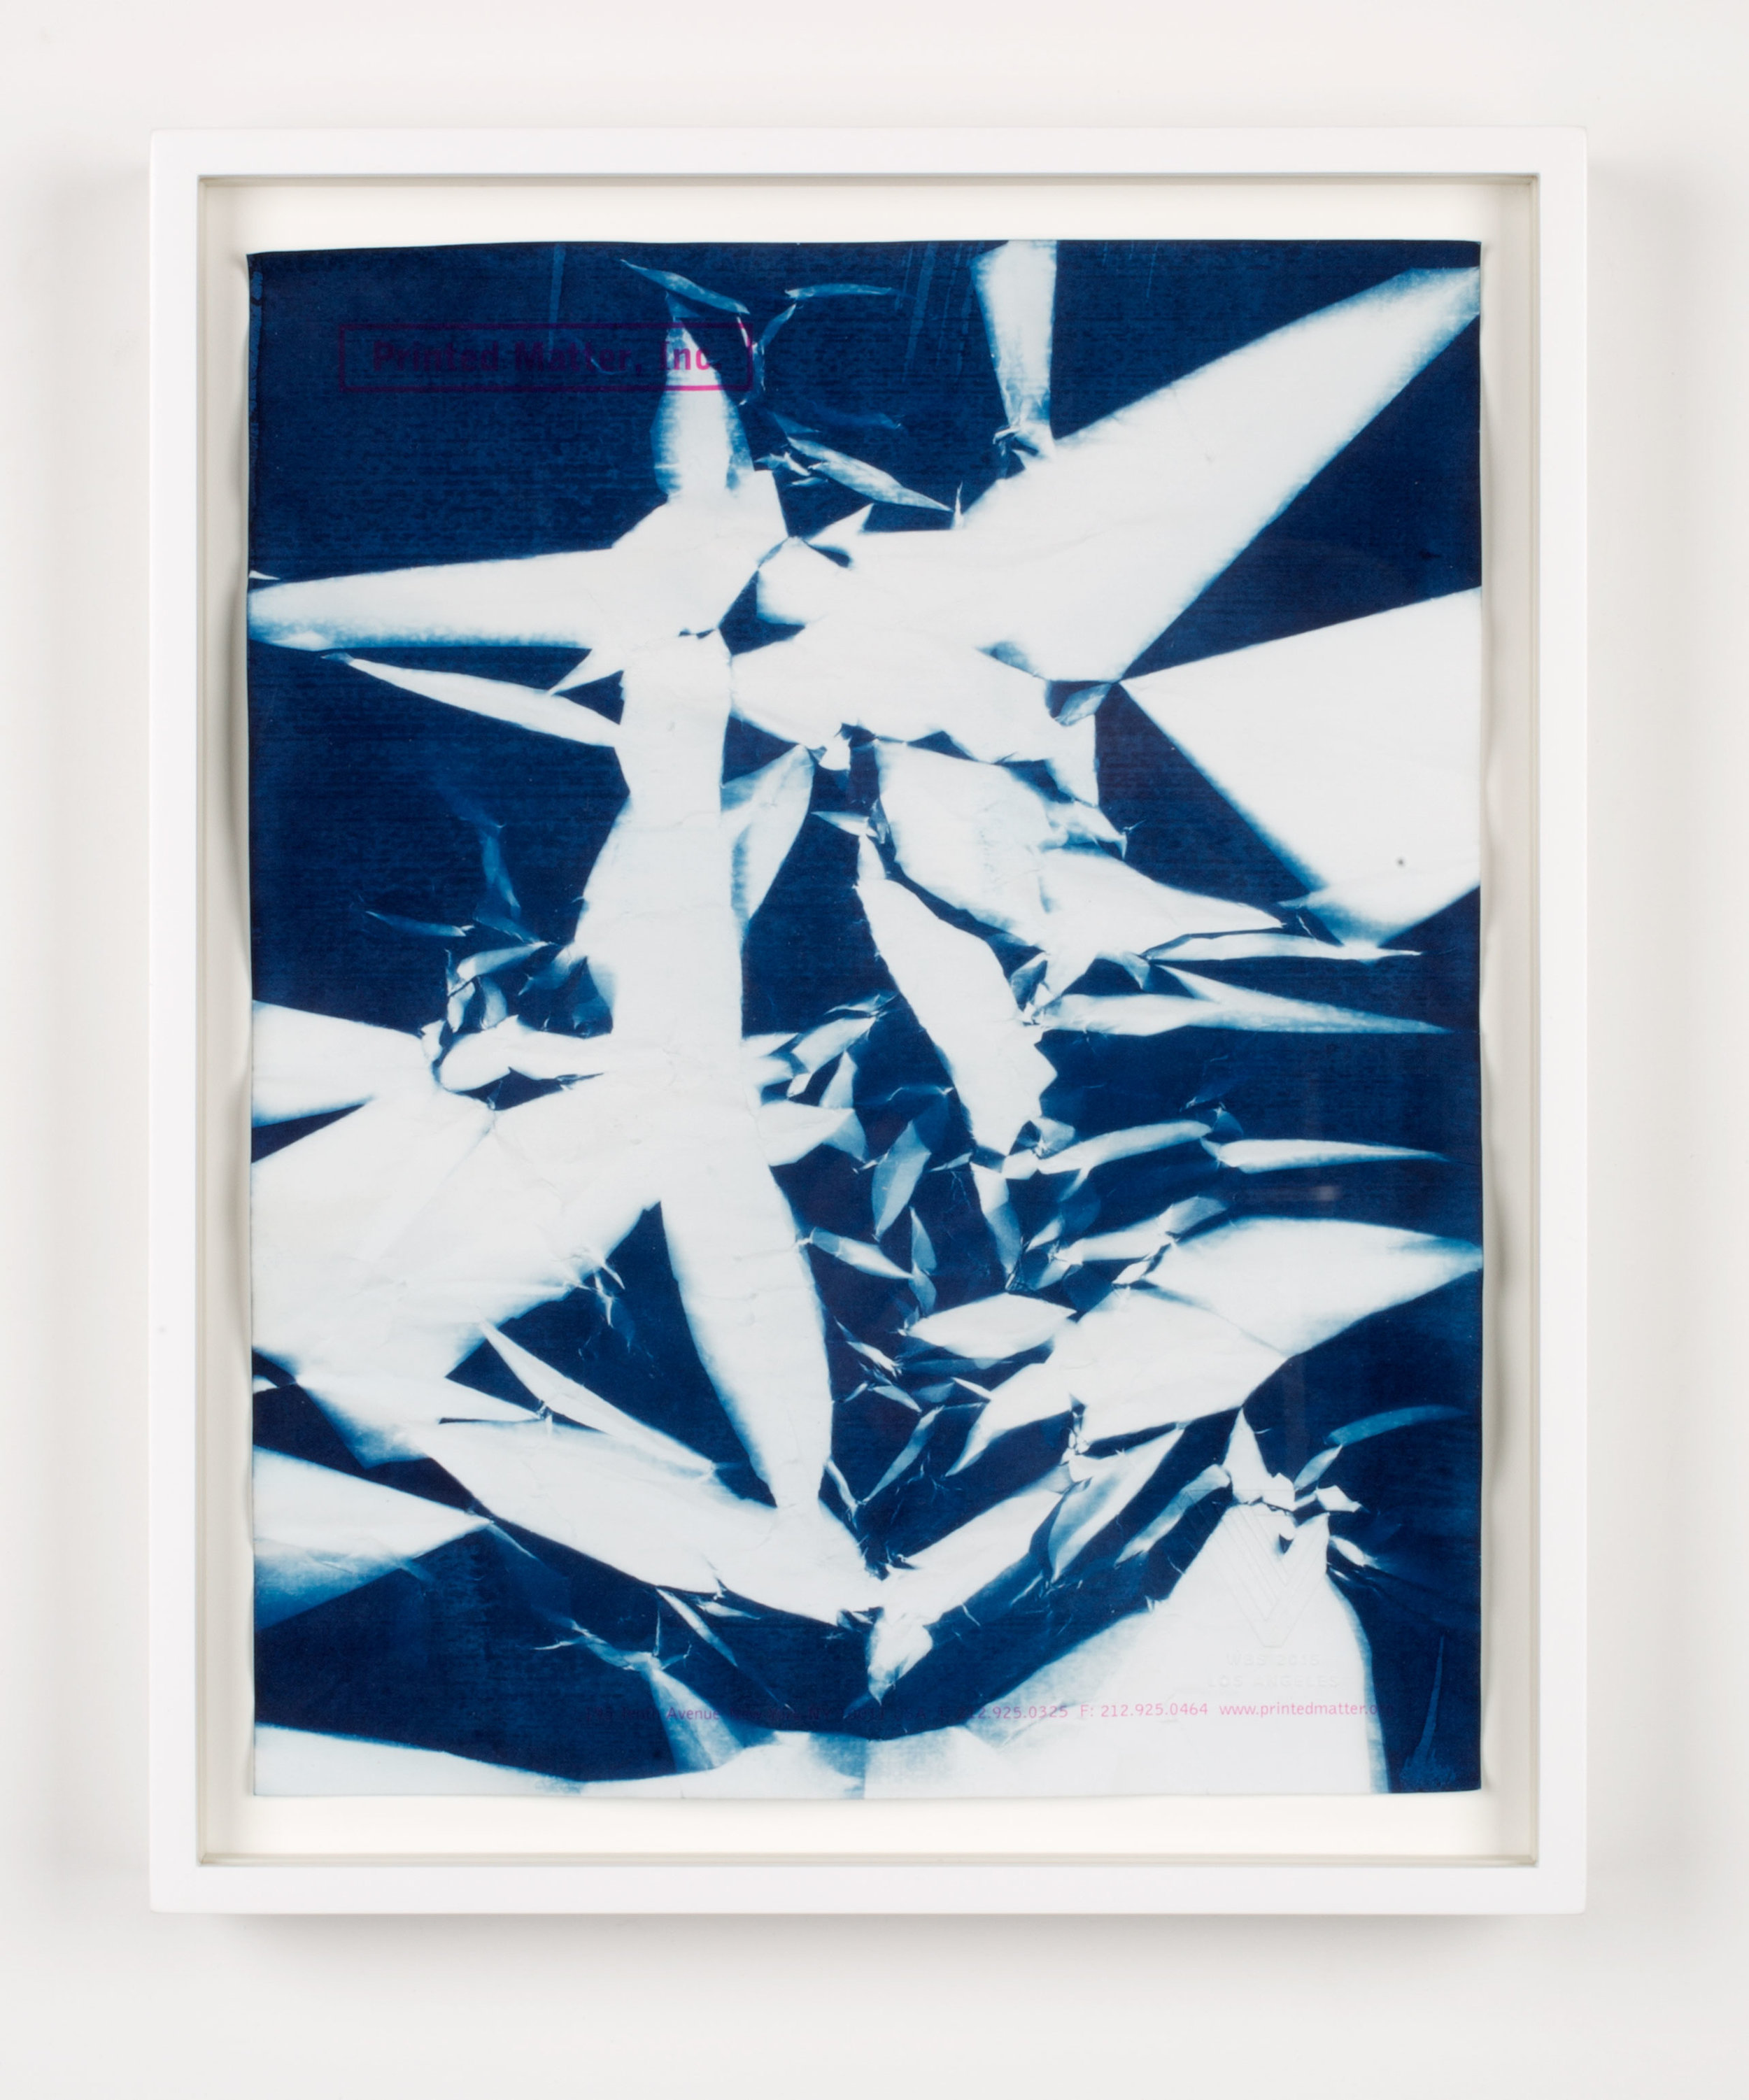   Printed Matter, Inc. 195 Tenth Avenue New York NY 10011 USA T: 212.925.0325 F: 212.925.0464 www.printedmatter.org   2015  Cyanotype and offset print on paper  11 x 8 1/2inches   Cyanotypes, 2009–     